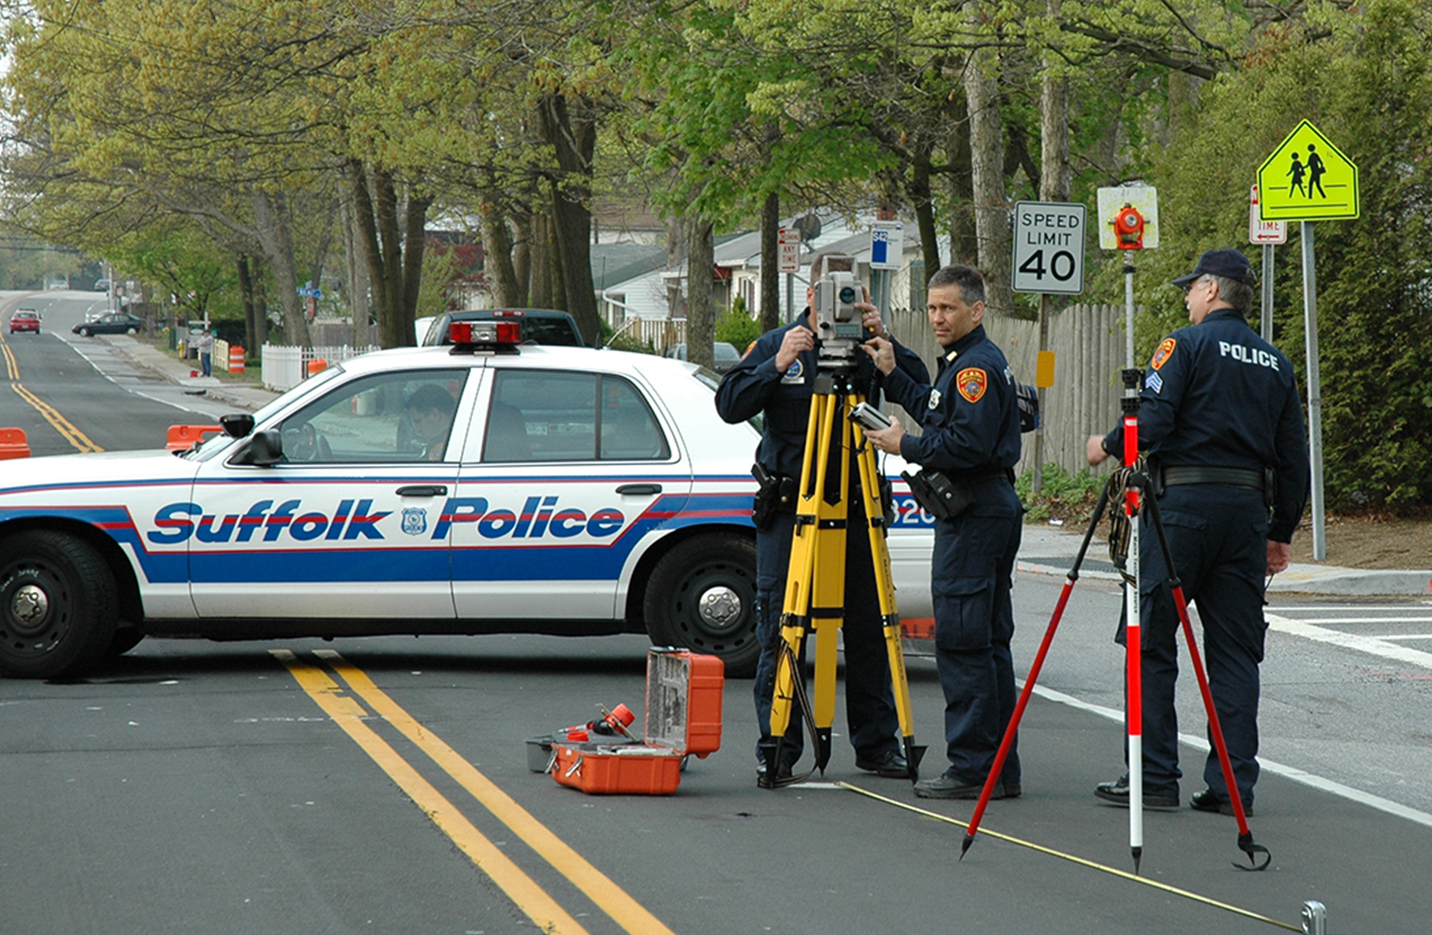 SCPD officers taking pictures of a crime scene